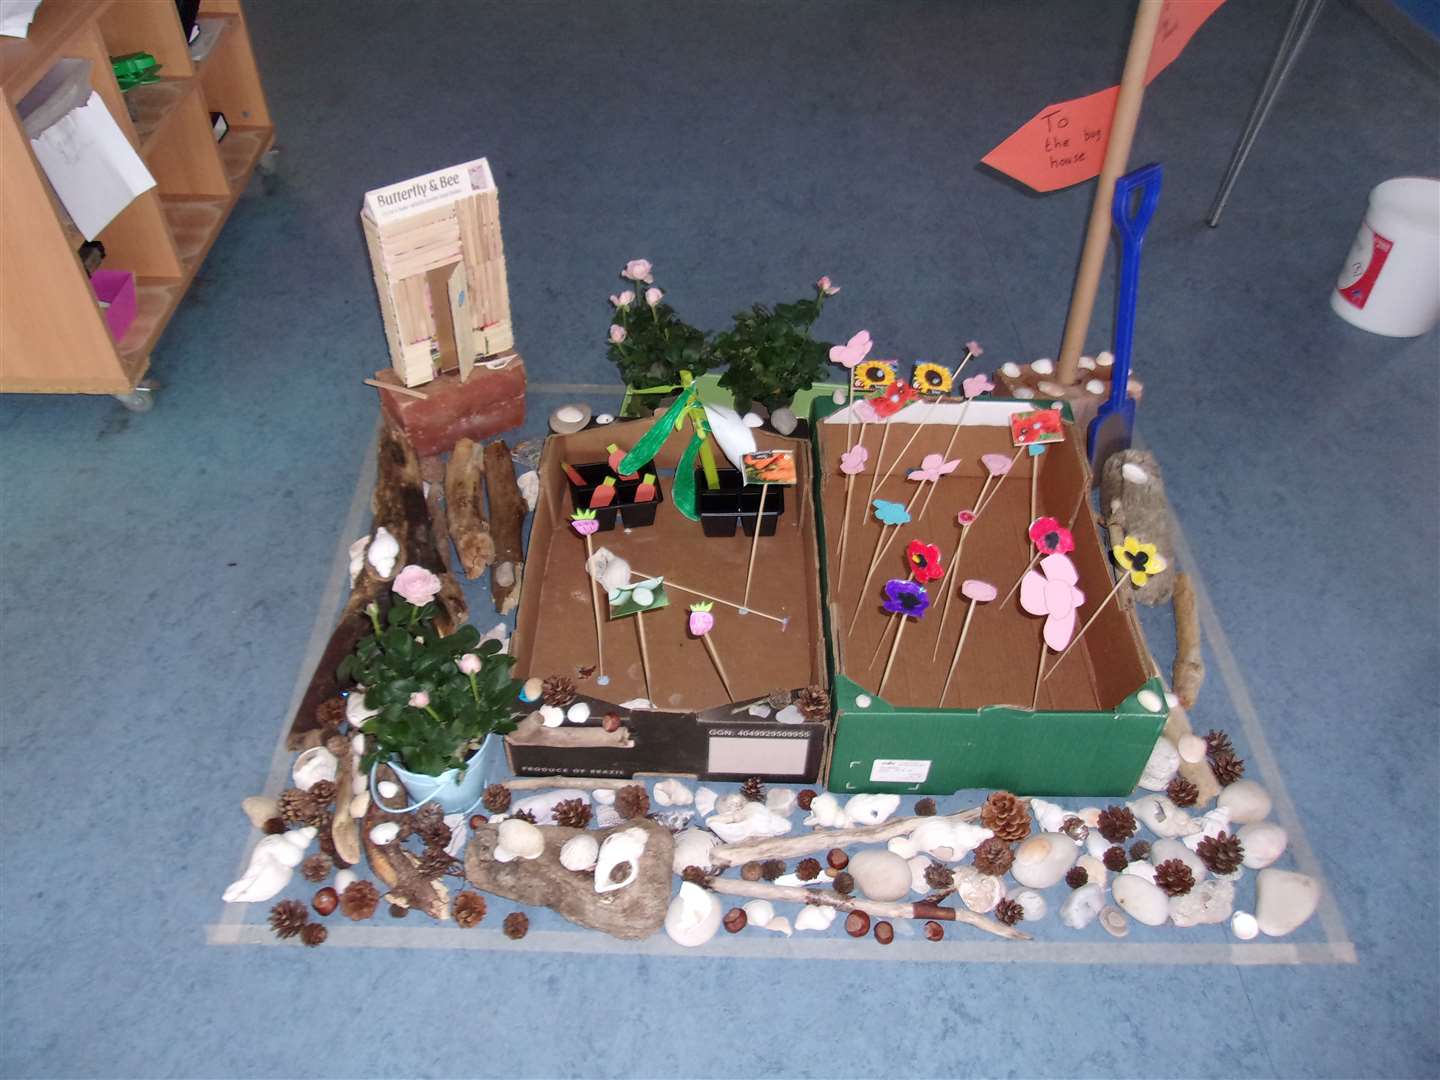 Children as young as three at Junior World Nairn helped create this entry.